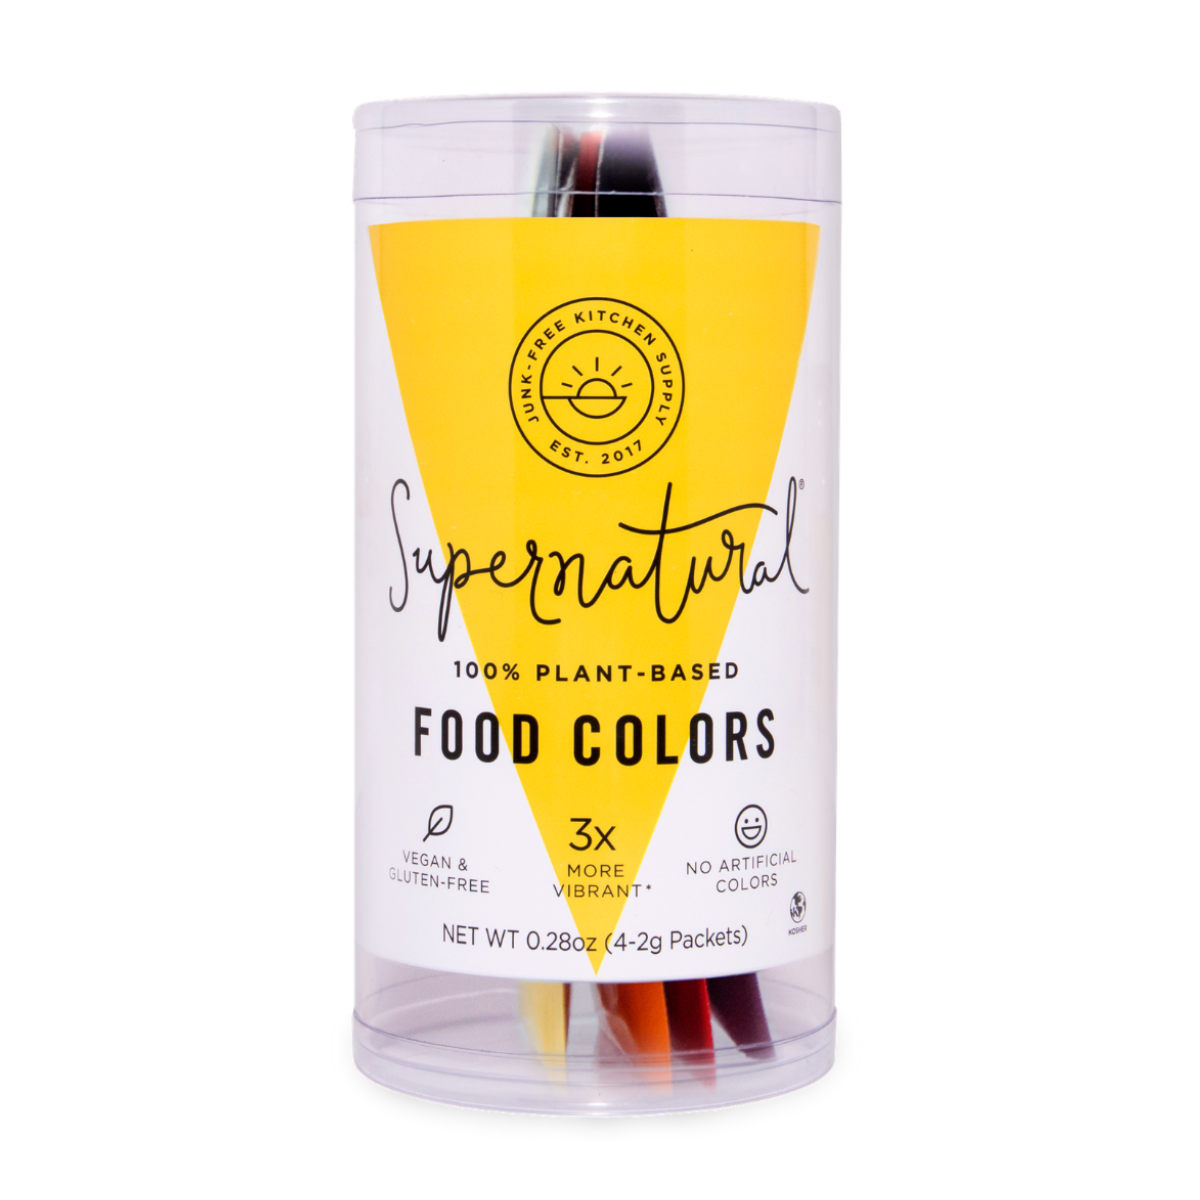 Supernatural Plant-Based Food Colors – urban farm collection